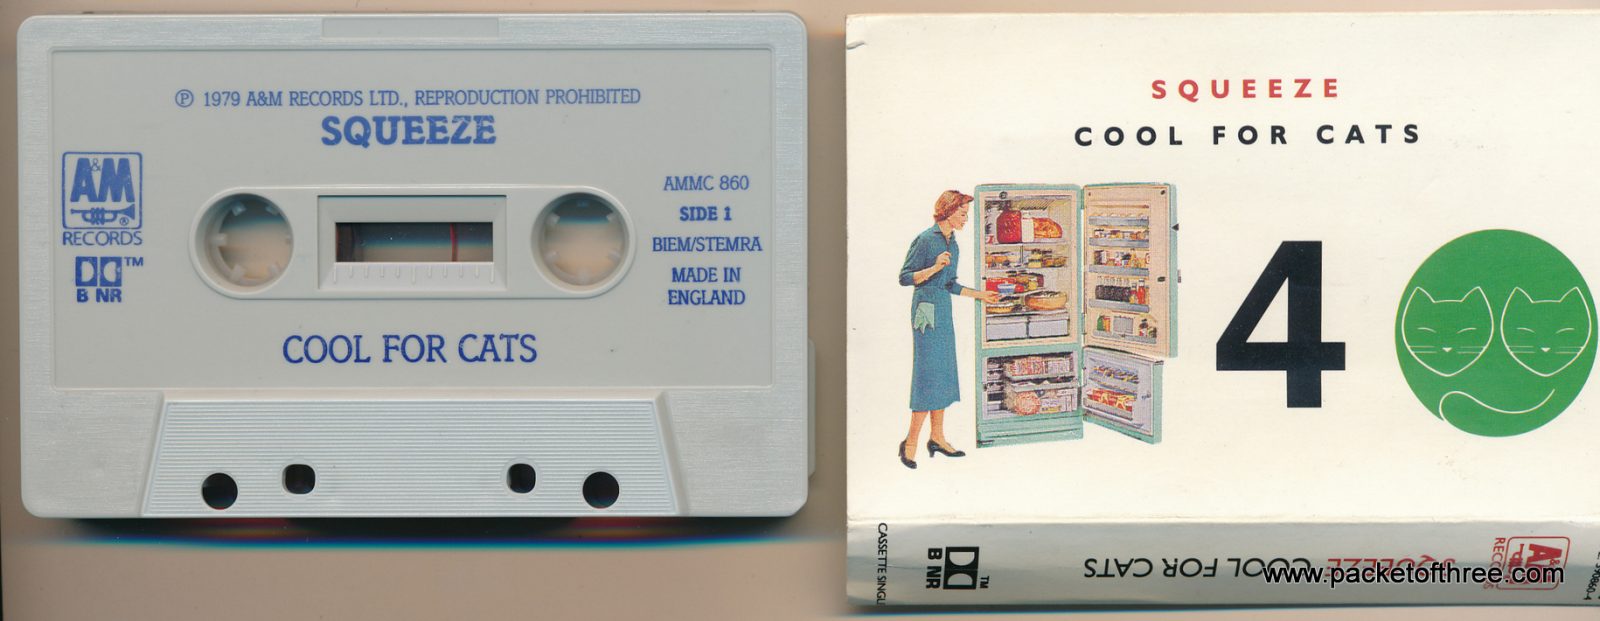 Cool For Cats - cassette single